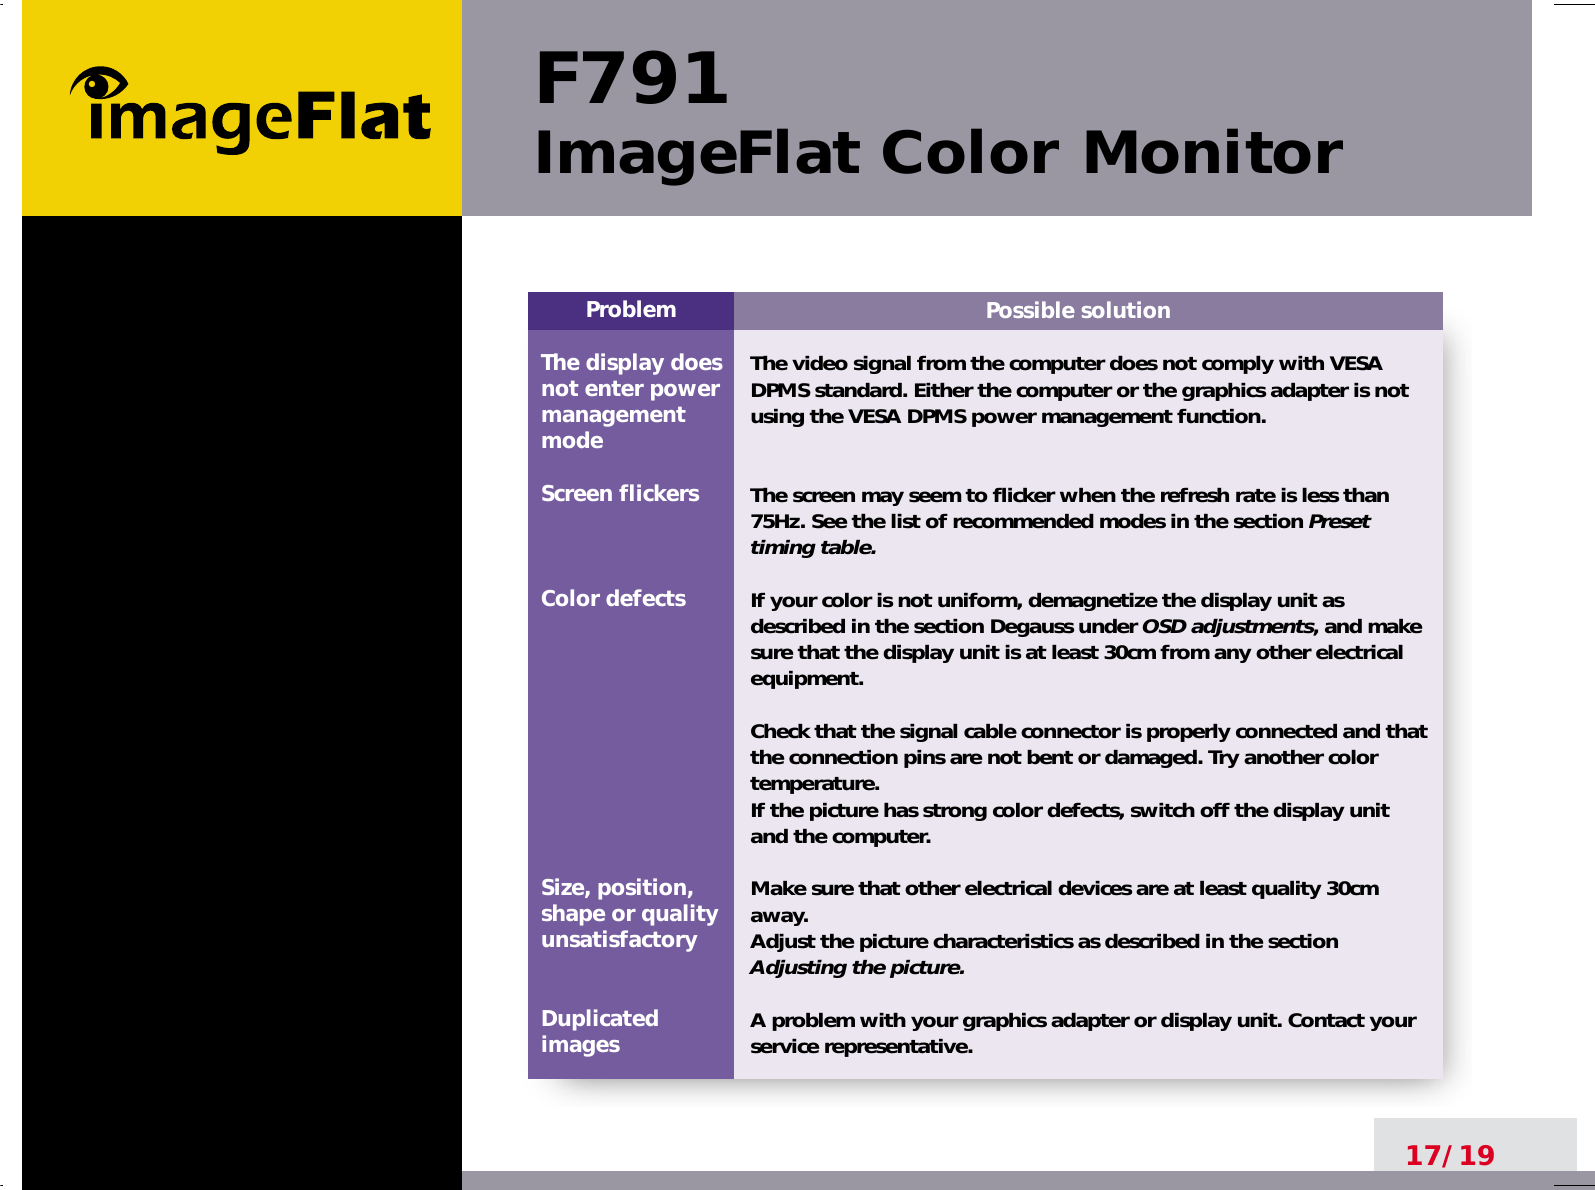 F791ImageFlat Color Monitor17/19Possible solutionThe video signal from the computer does not comply with VESADPMS standard. Either the computer or the graphics adapter is notusing the VESA DPMS power management function.The screen may seem to flicker when the refresh rate is less than75Hz. See the list of recommended modes in the section Presettiming table.If your color is not uniform, demagnetize the display unit asdescribed in the section Degauss under OSD adjustments, and makesure that the display unit is at least 30cm from any other electricalequipment.Check that the signal cable connector is properly connected and thatthe connection pins are not bent or damaged. Try another colortemperature. If the picture has strong color defects, switch off the display unitand the computer.Make sure that other electrical devices are at least quality 30cmaway.Adjust the picture characteristics as described in the sectionAdjusting the picture.A problem with your graphics adapter or display unit. Contact yourservice representative.ProblemThe display does not enter power managementmodeScreen flickersColor defectsSize, position,shape or qualityunsatisfactoryDuplicatedimages